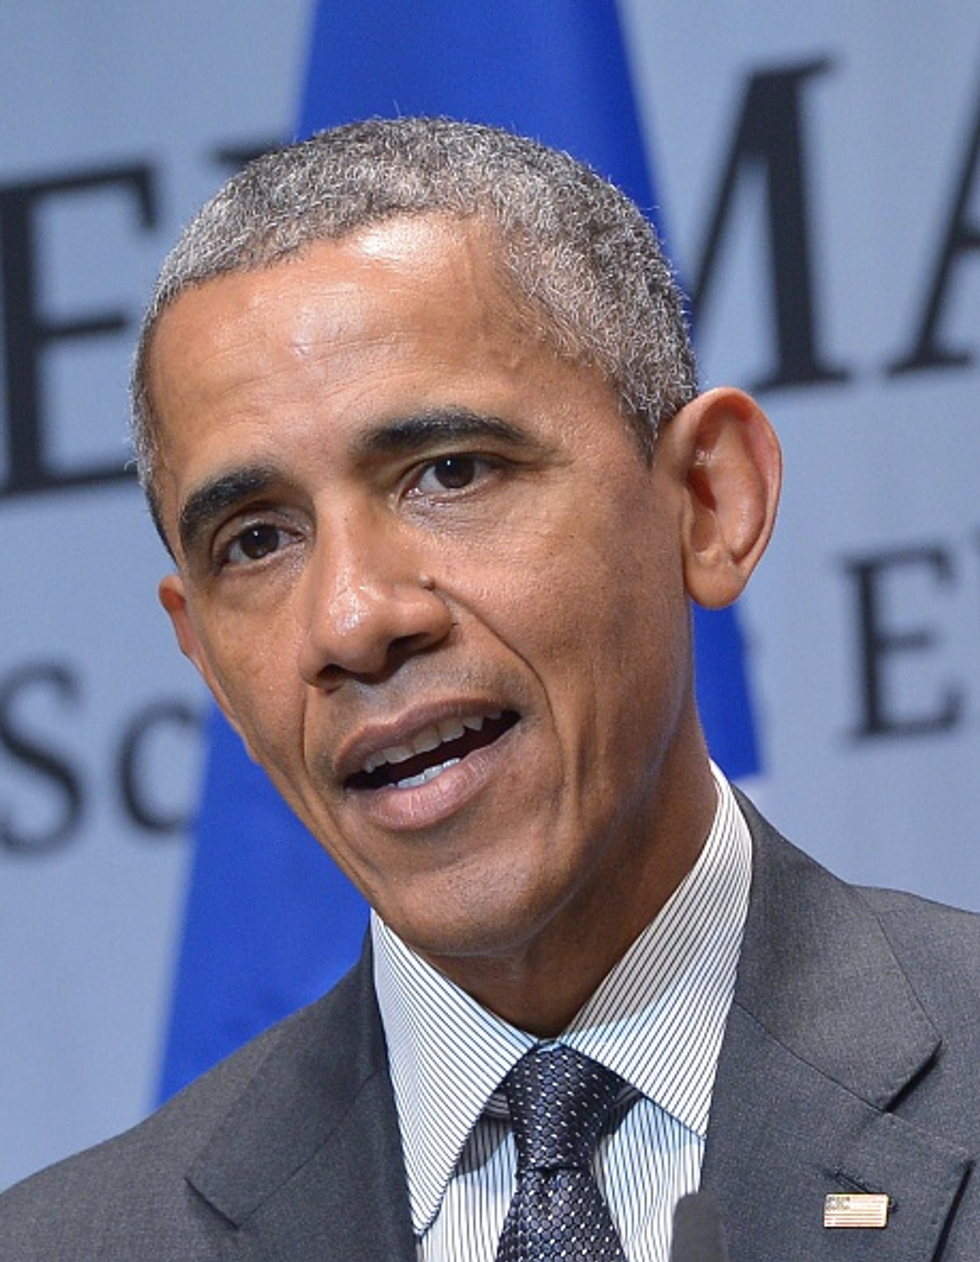 Obama on His Controversial Policy: 'It Doesn’t Need Fixing’